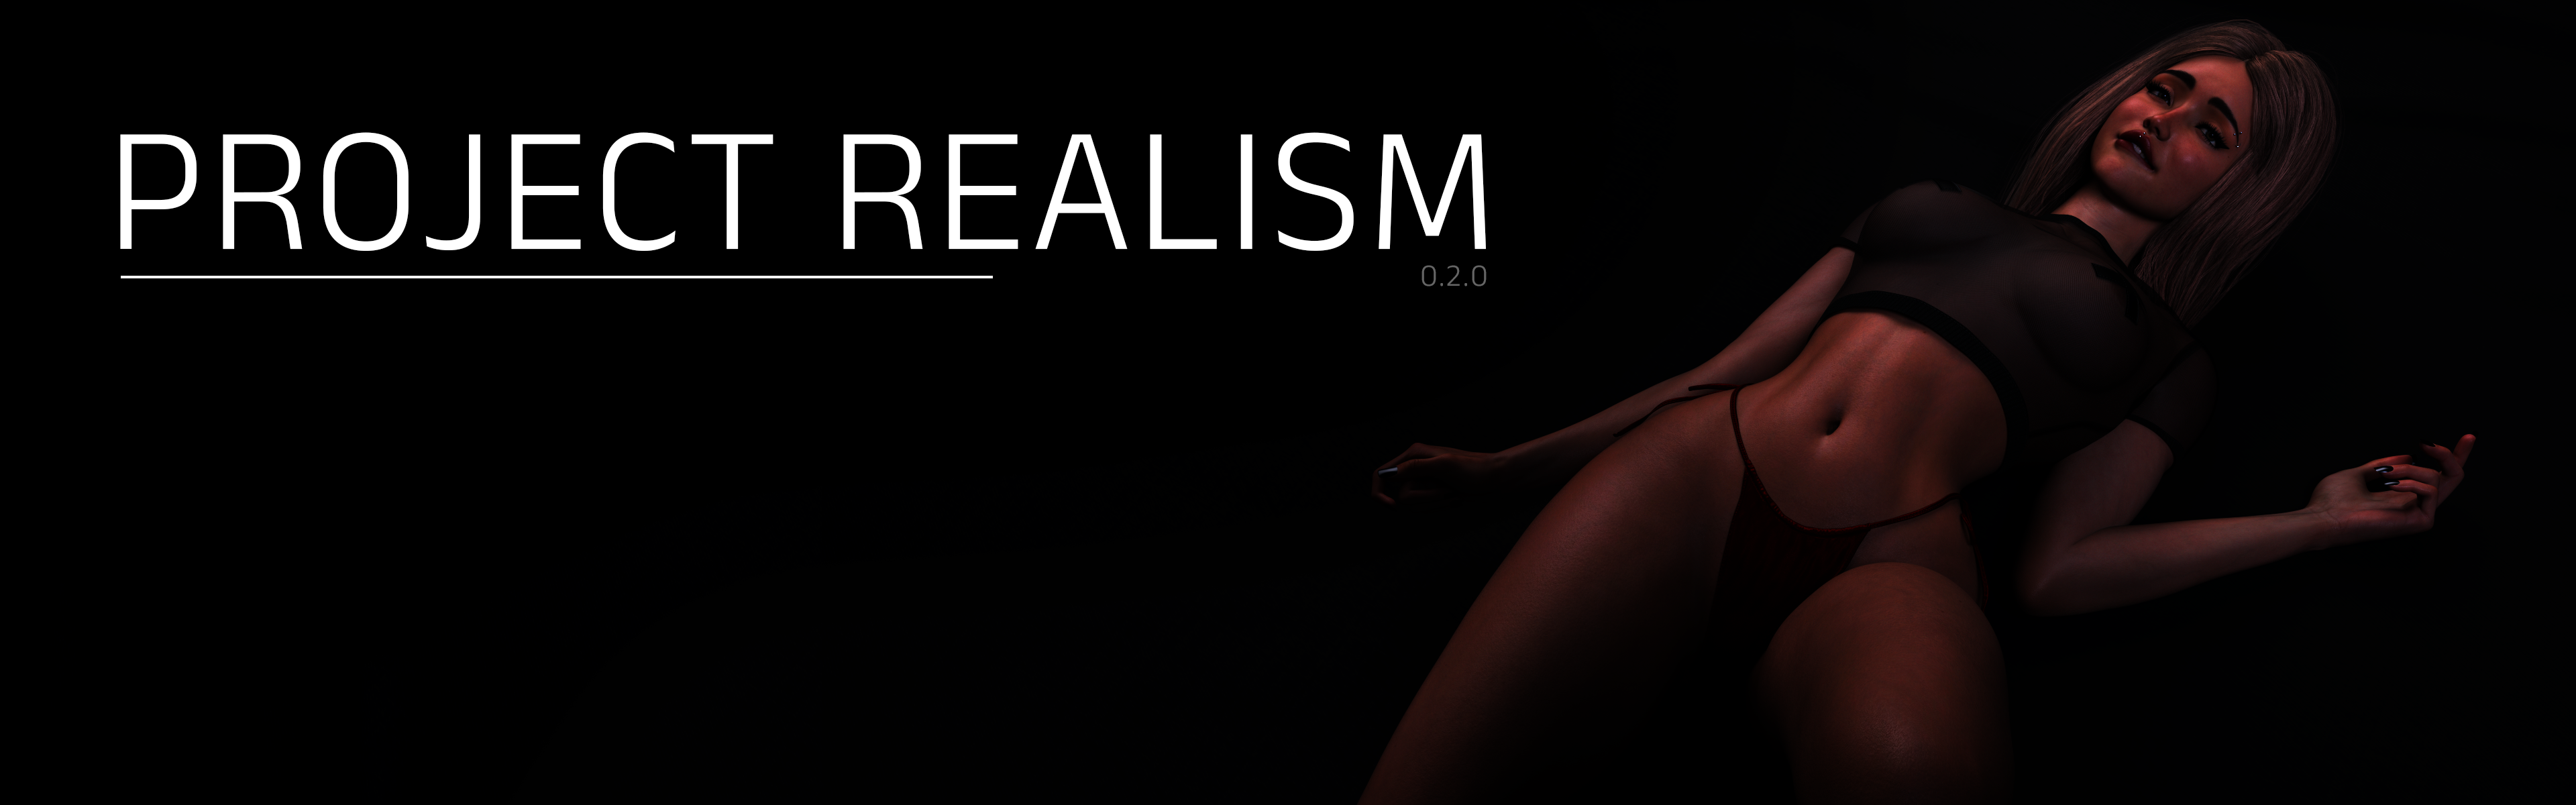 Project Realism